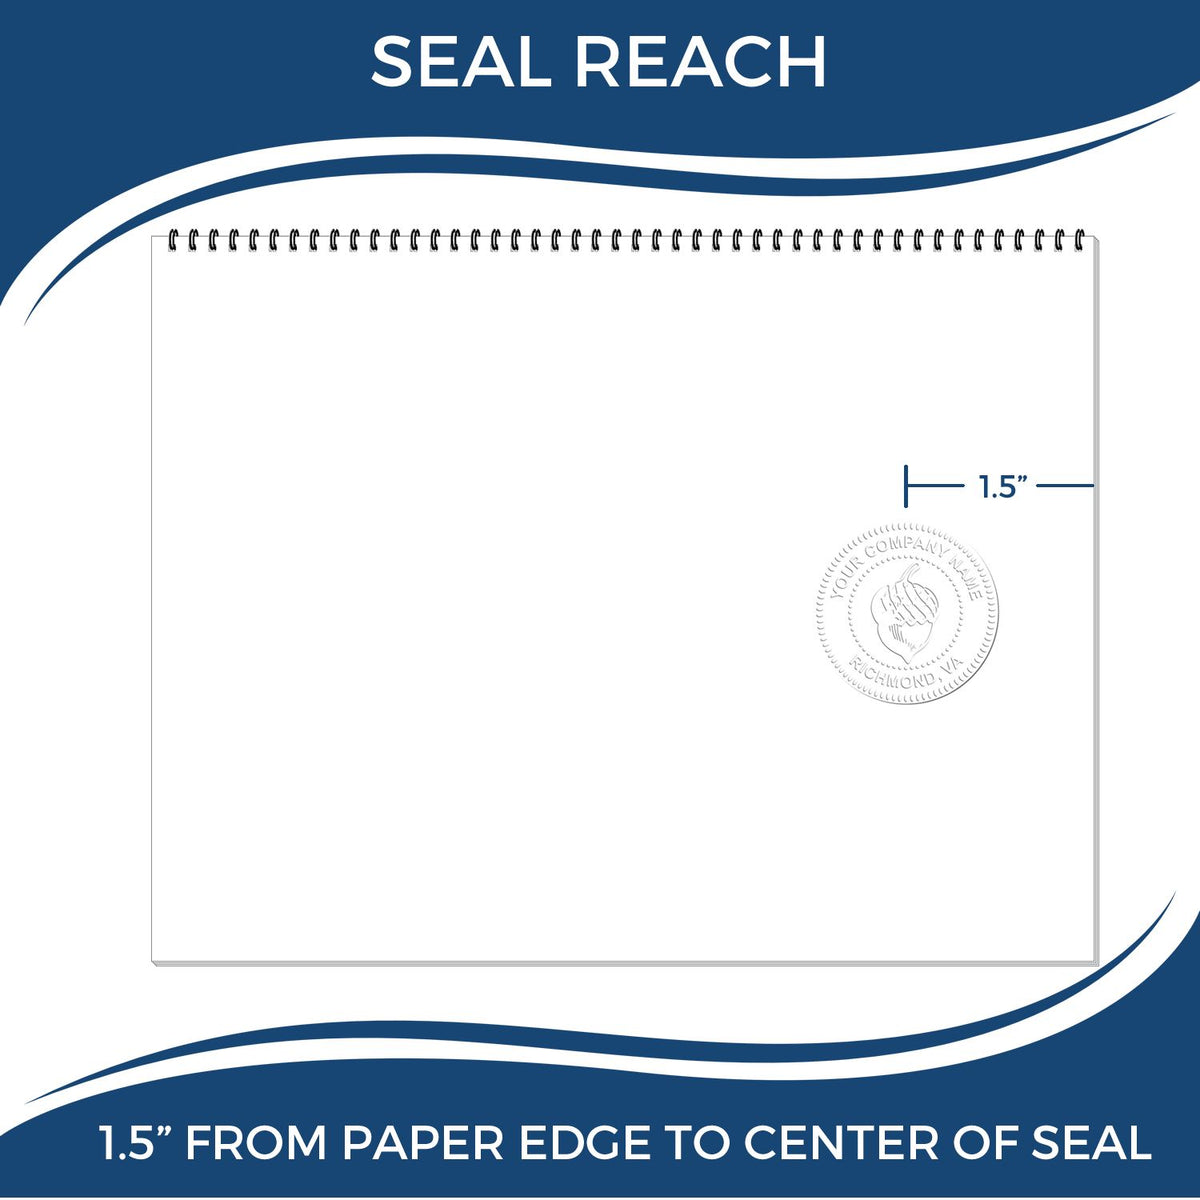 An infographic showing the seal reach which is represented by a ruler and a miniature seal image of the Soft Ohio Professional Engineer Seal